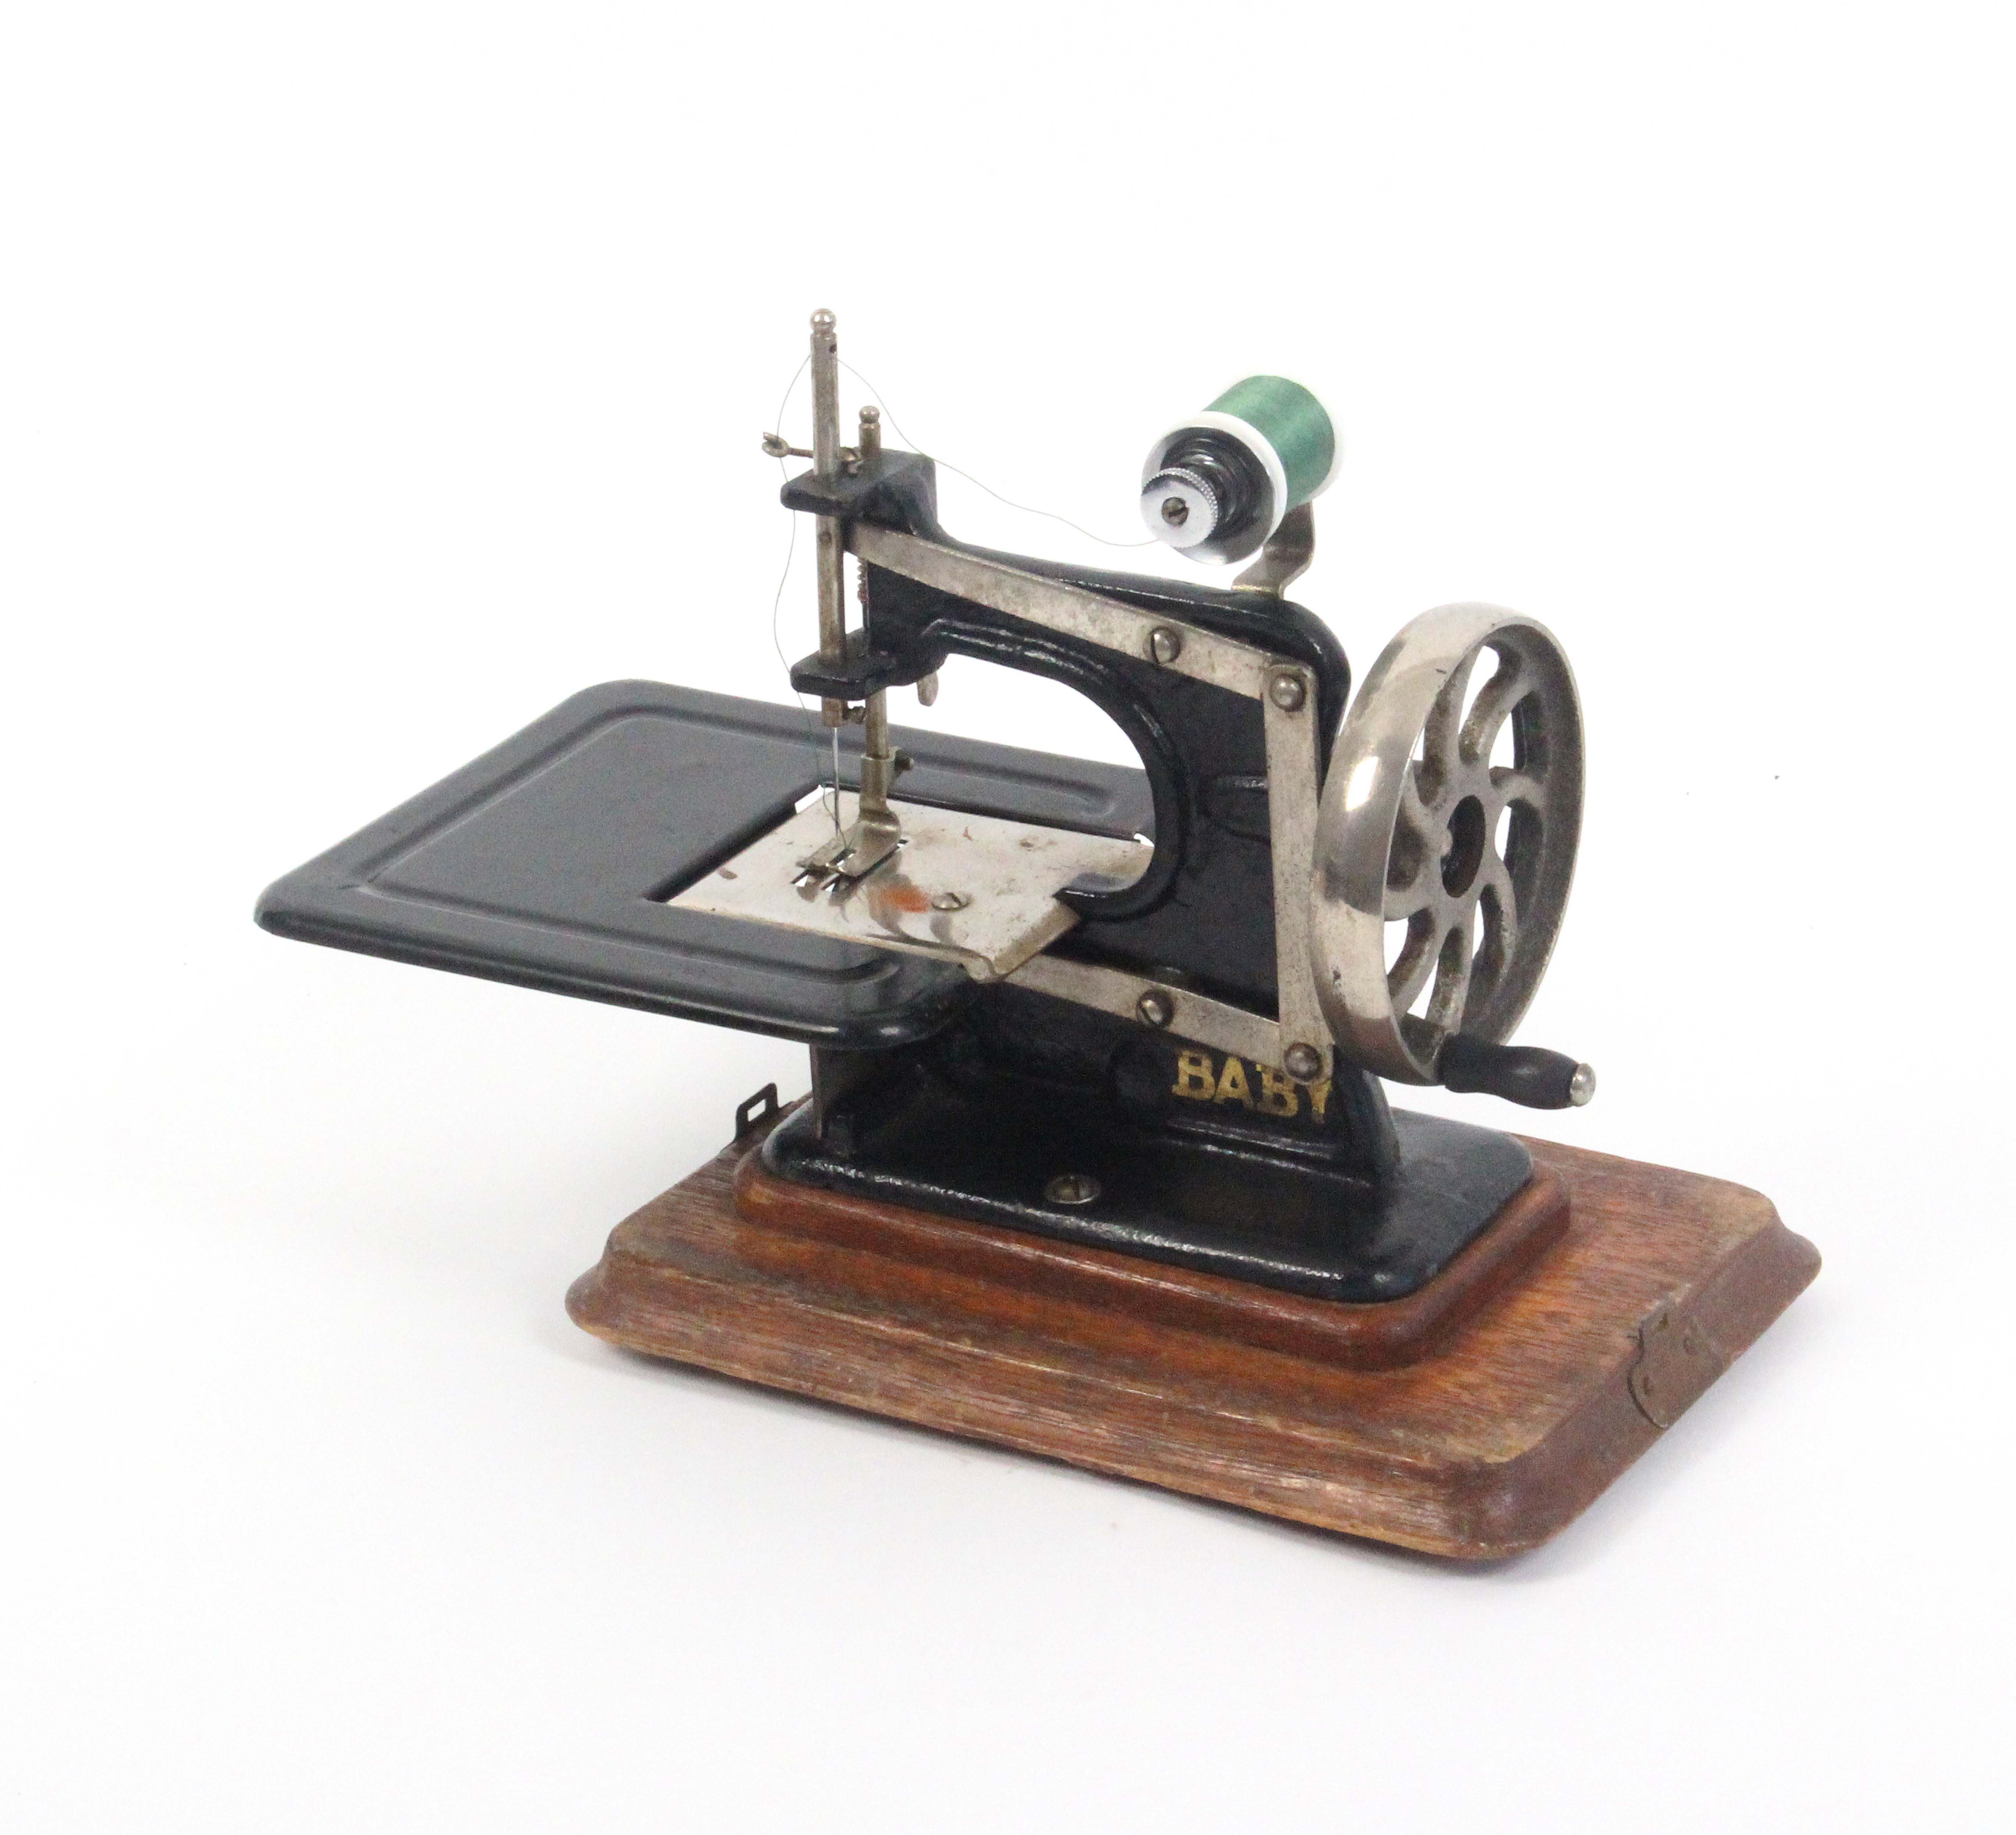 An early 20th Century sewing machine ‘Baby’, in gilt on black, wooden plinth base, additional - Image 4 of 4